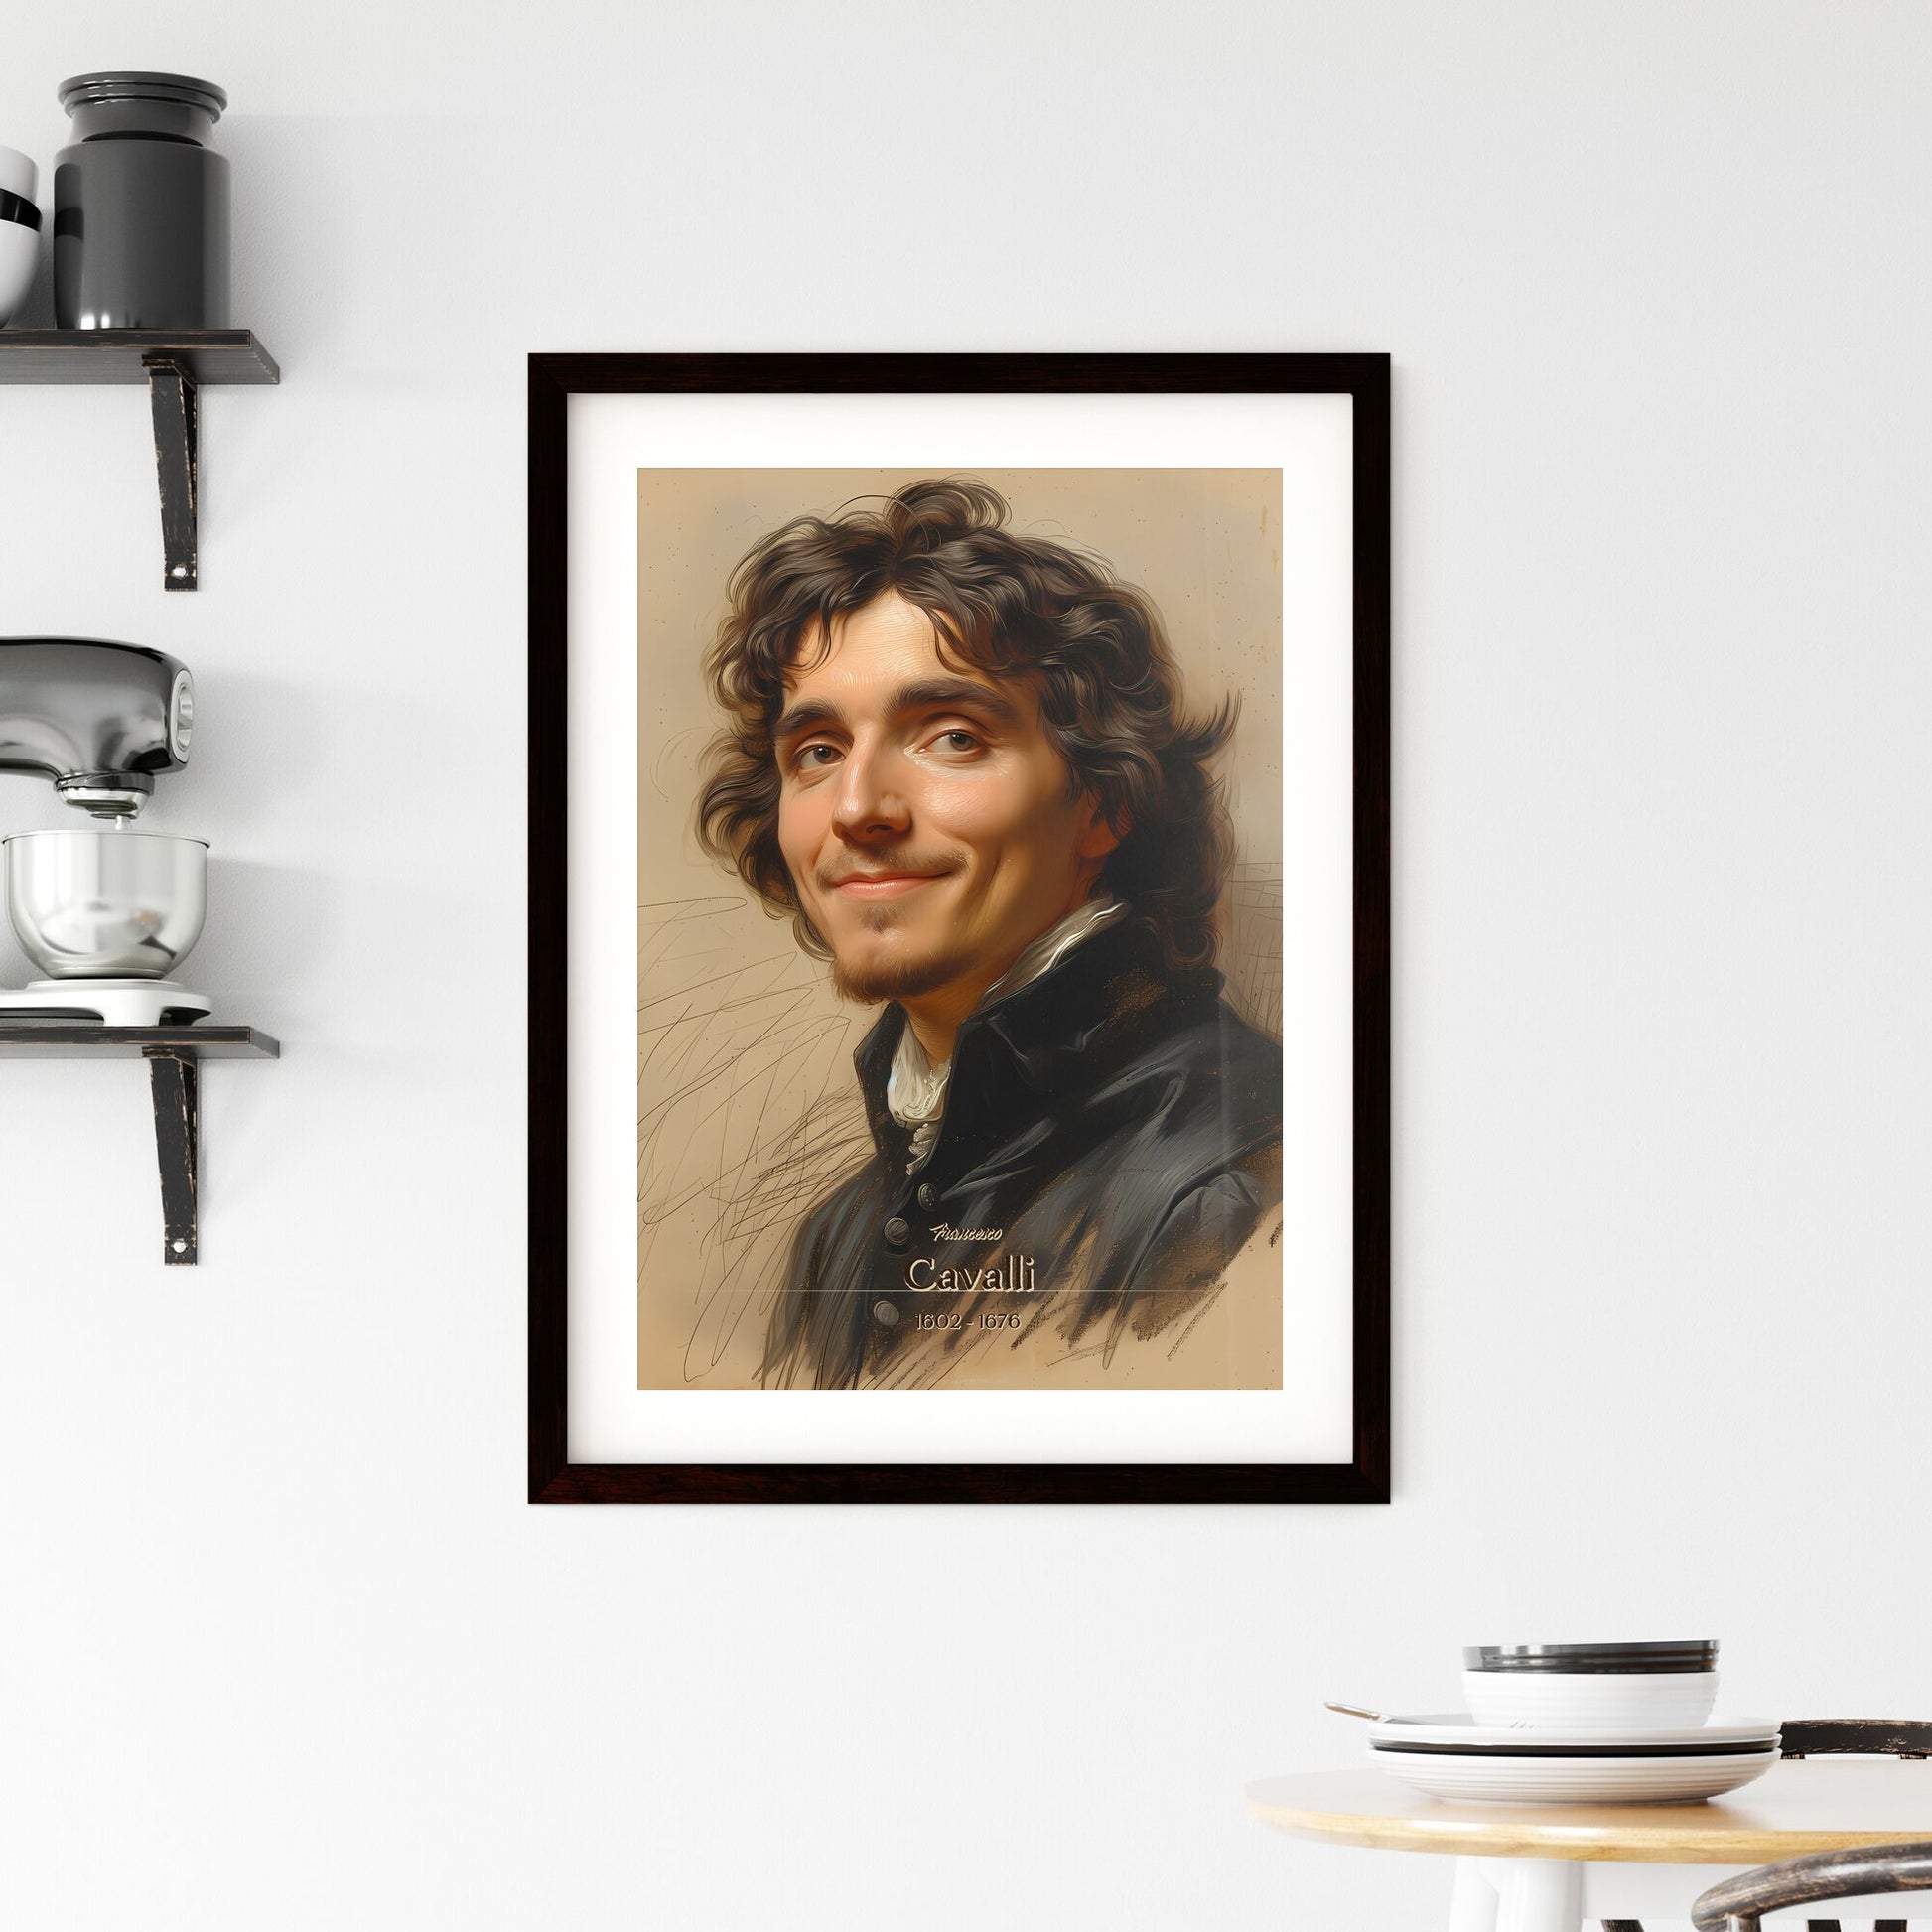 Francesco, Cavalli, 1602 - 1676, A Poster of a man with curly hair smiling Default Title